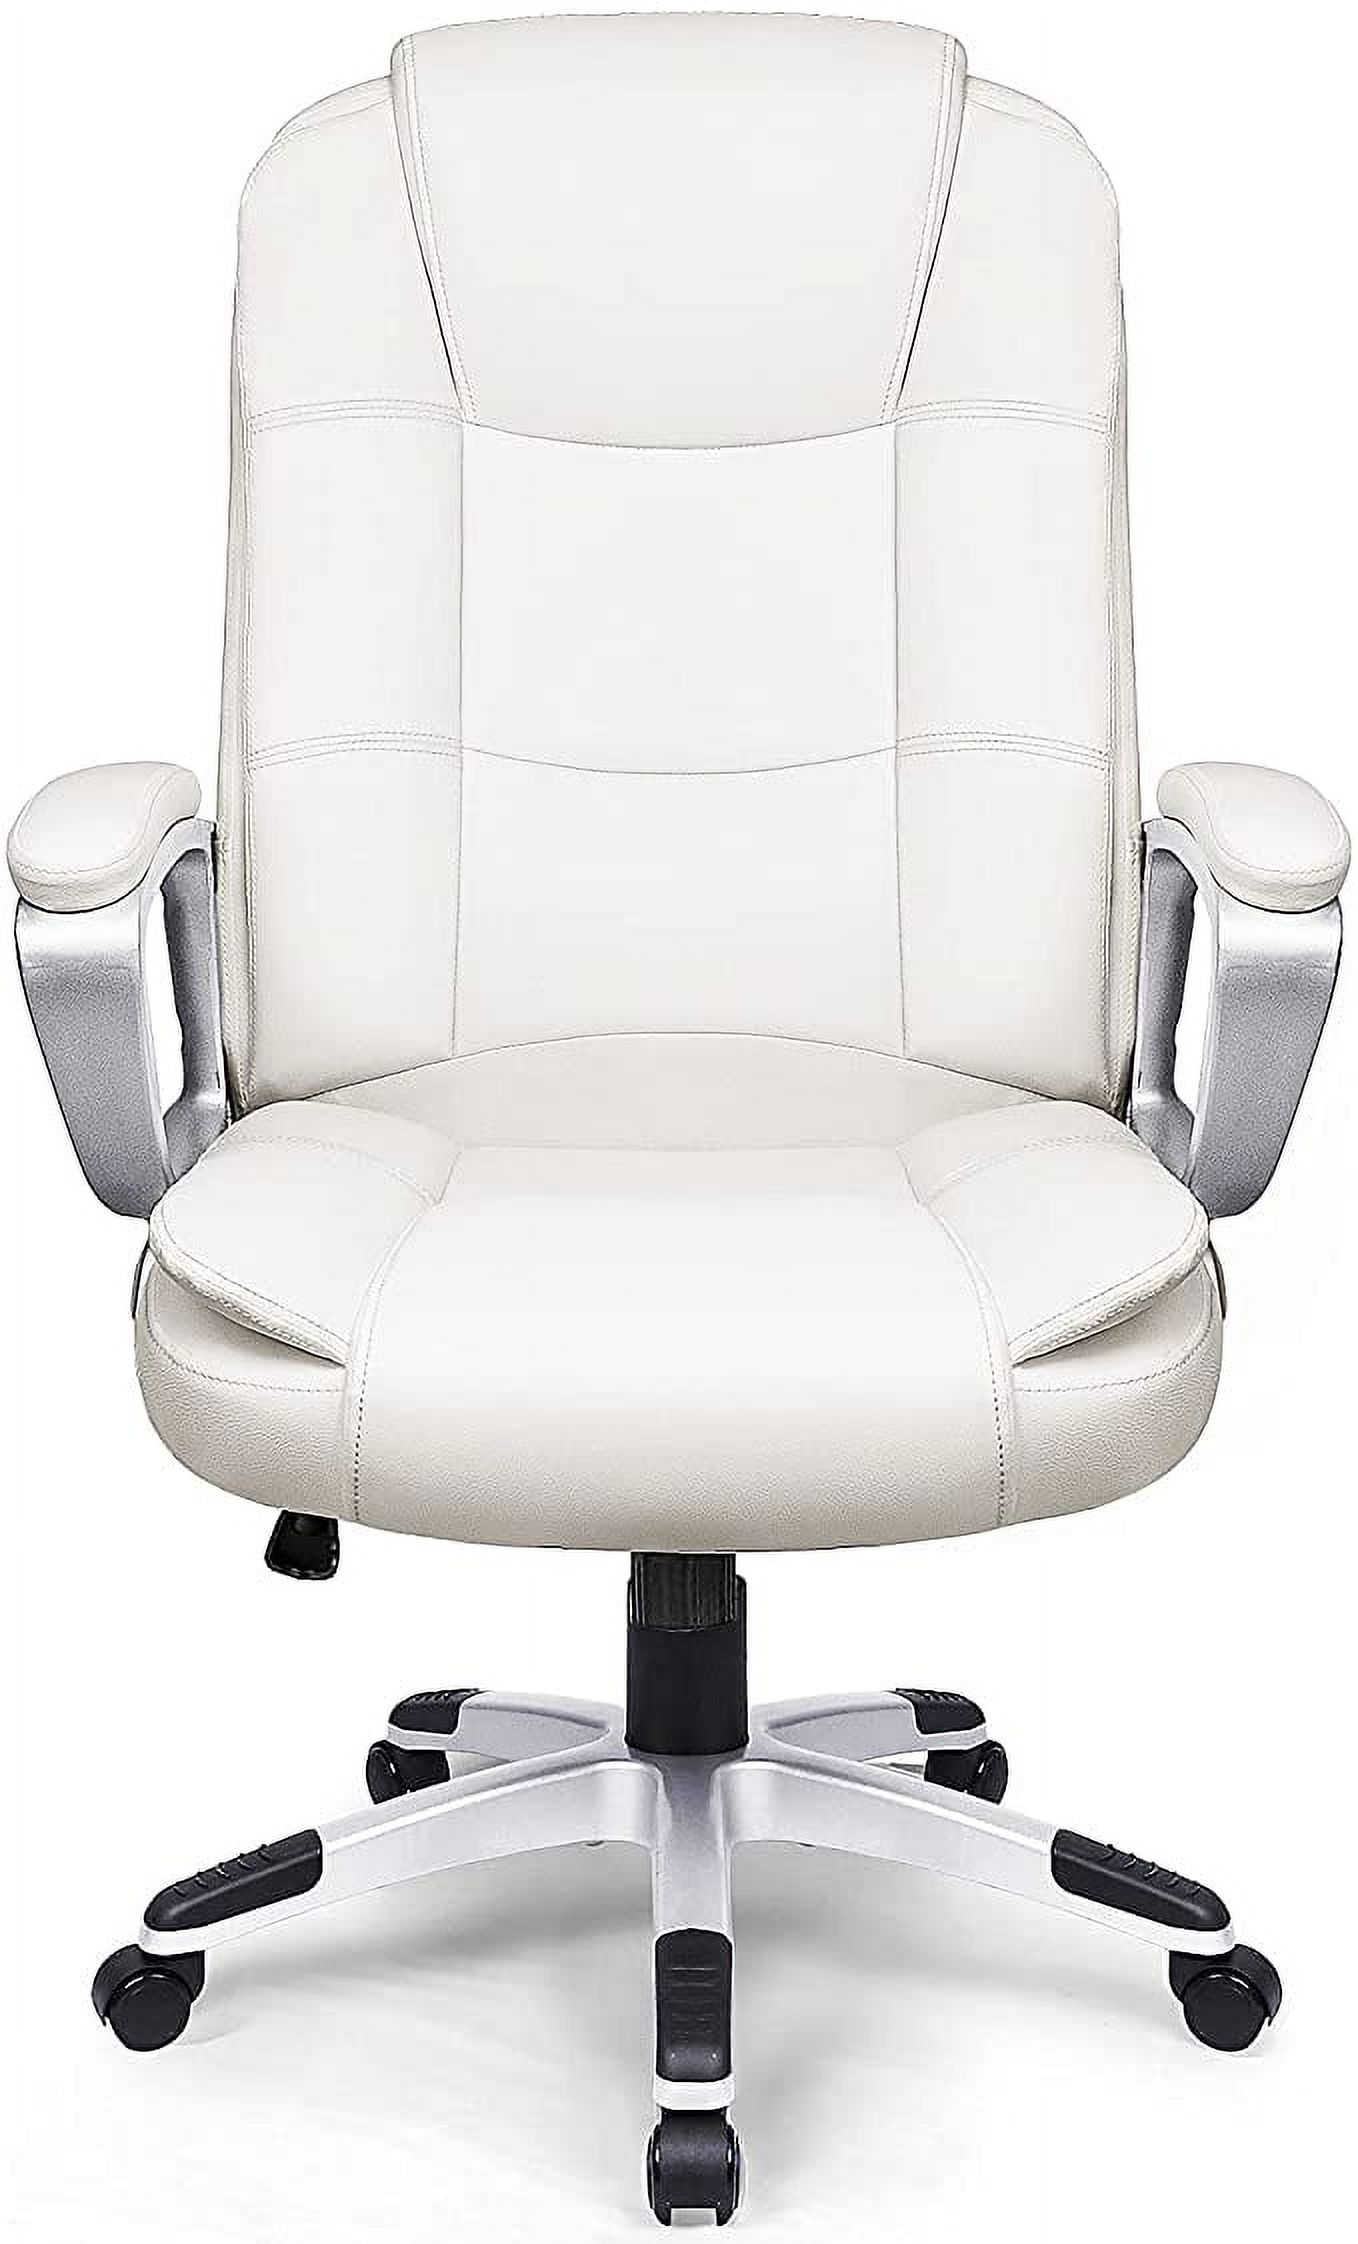 Home Office Chair, Comfortable Heavy Duty Design, Ergonomic High Back Cushion Lumbar Back Support, Computer Desk Chair, Big and Tall Chair, Adjustable Executive Leather Chair with Arms (White) - image 1 of 7